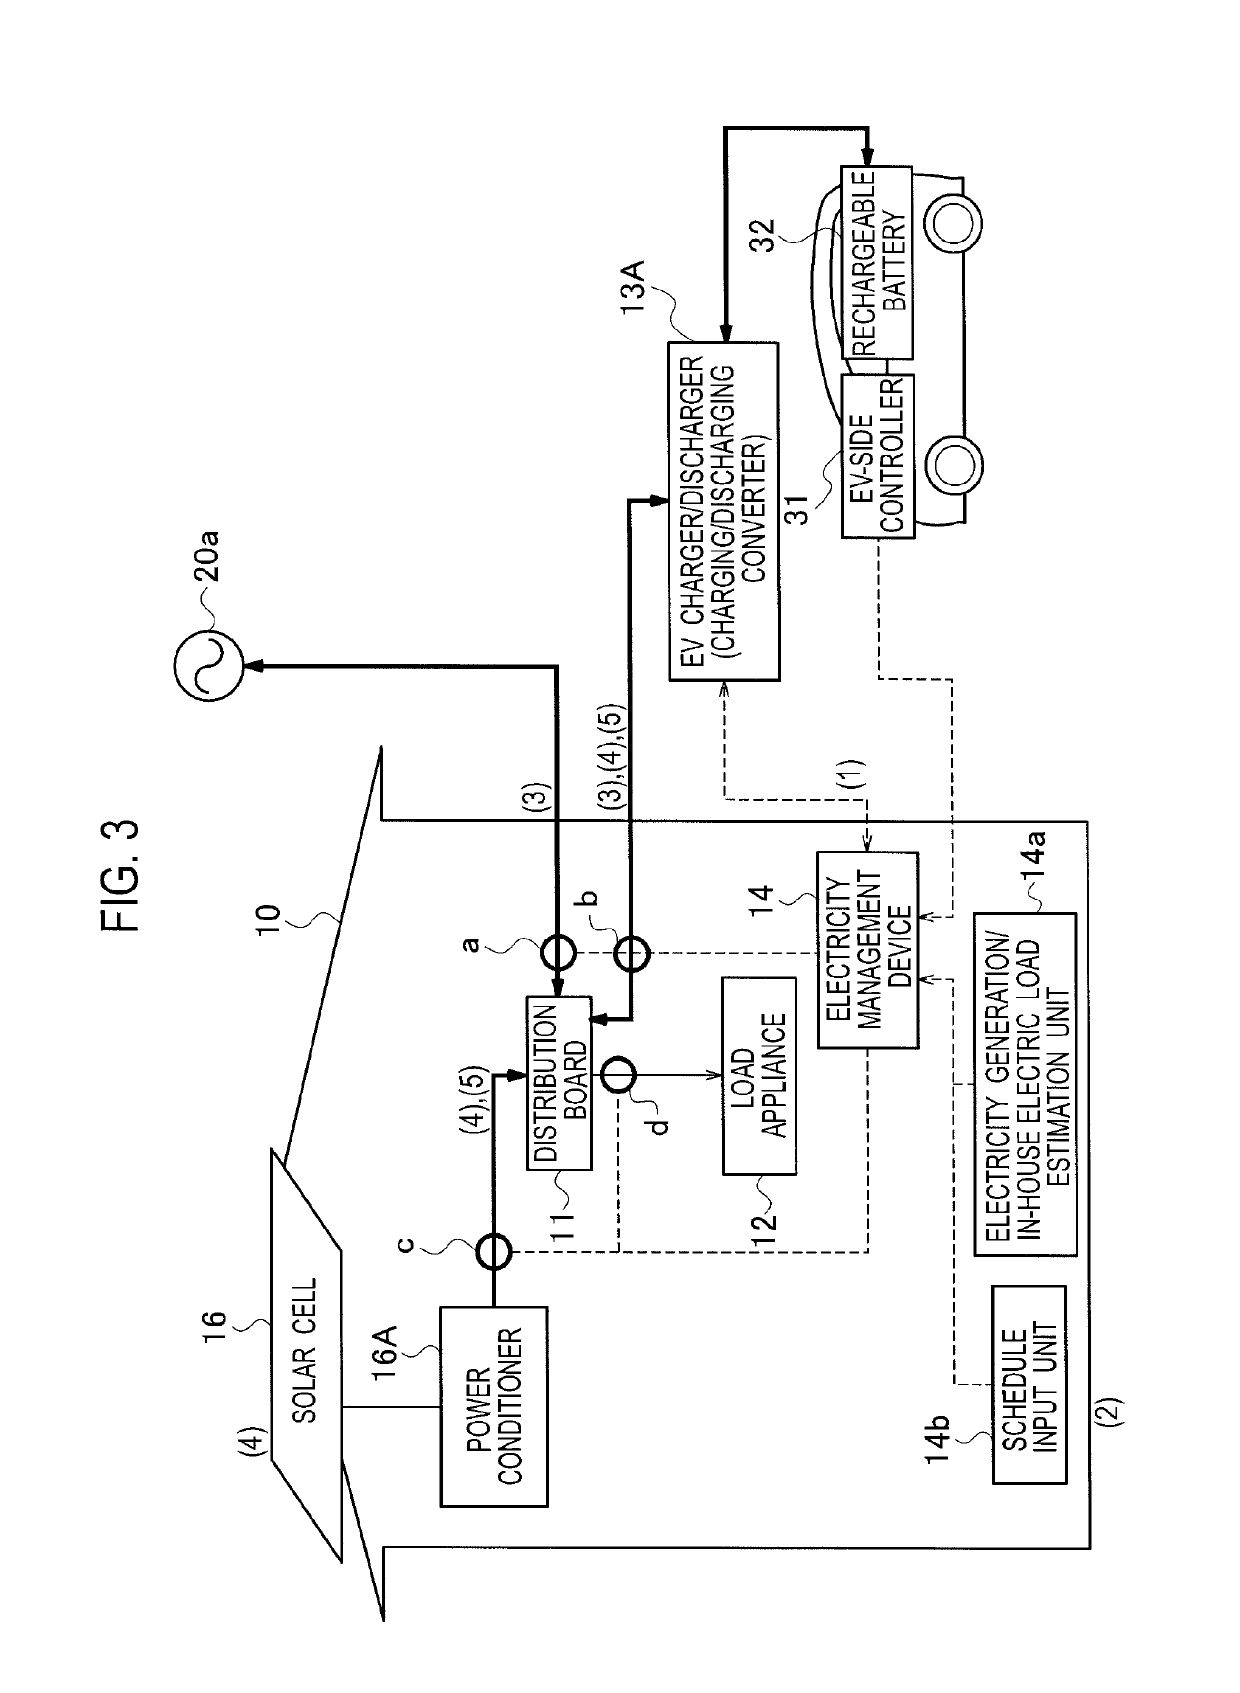 Electricity management device, electricity management method, and electricity distribution system inside a house with electricity generating device, utility grid connection, and electric vehicle containing a rechargeable battery in a vehicle-to-grid connection with counter device